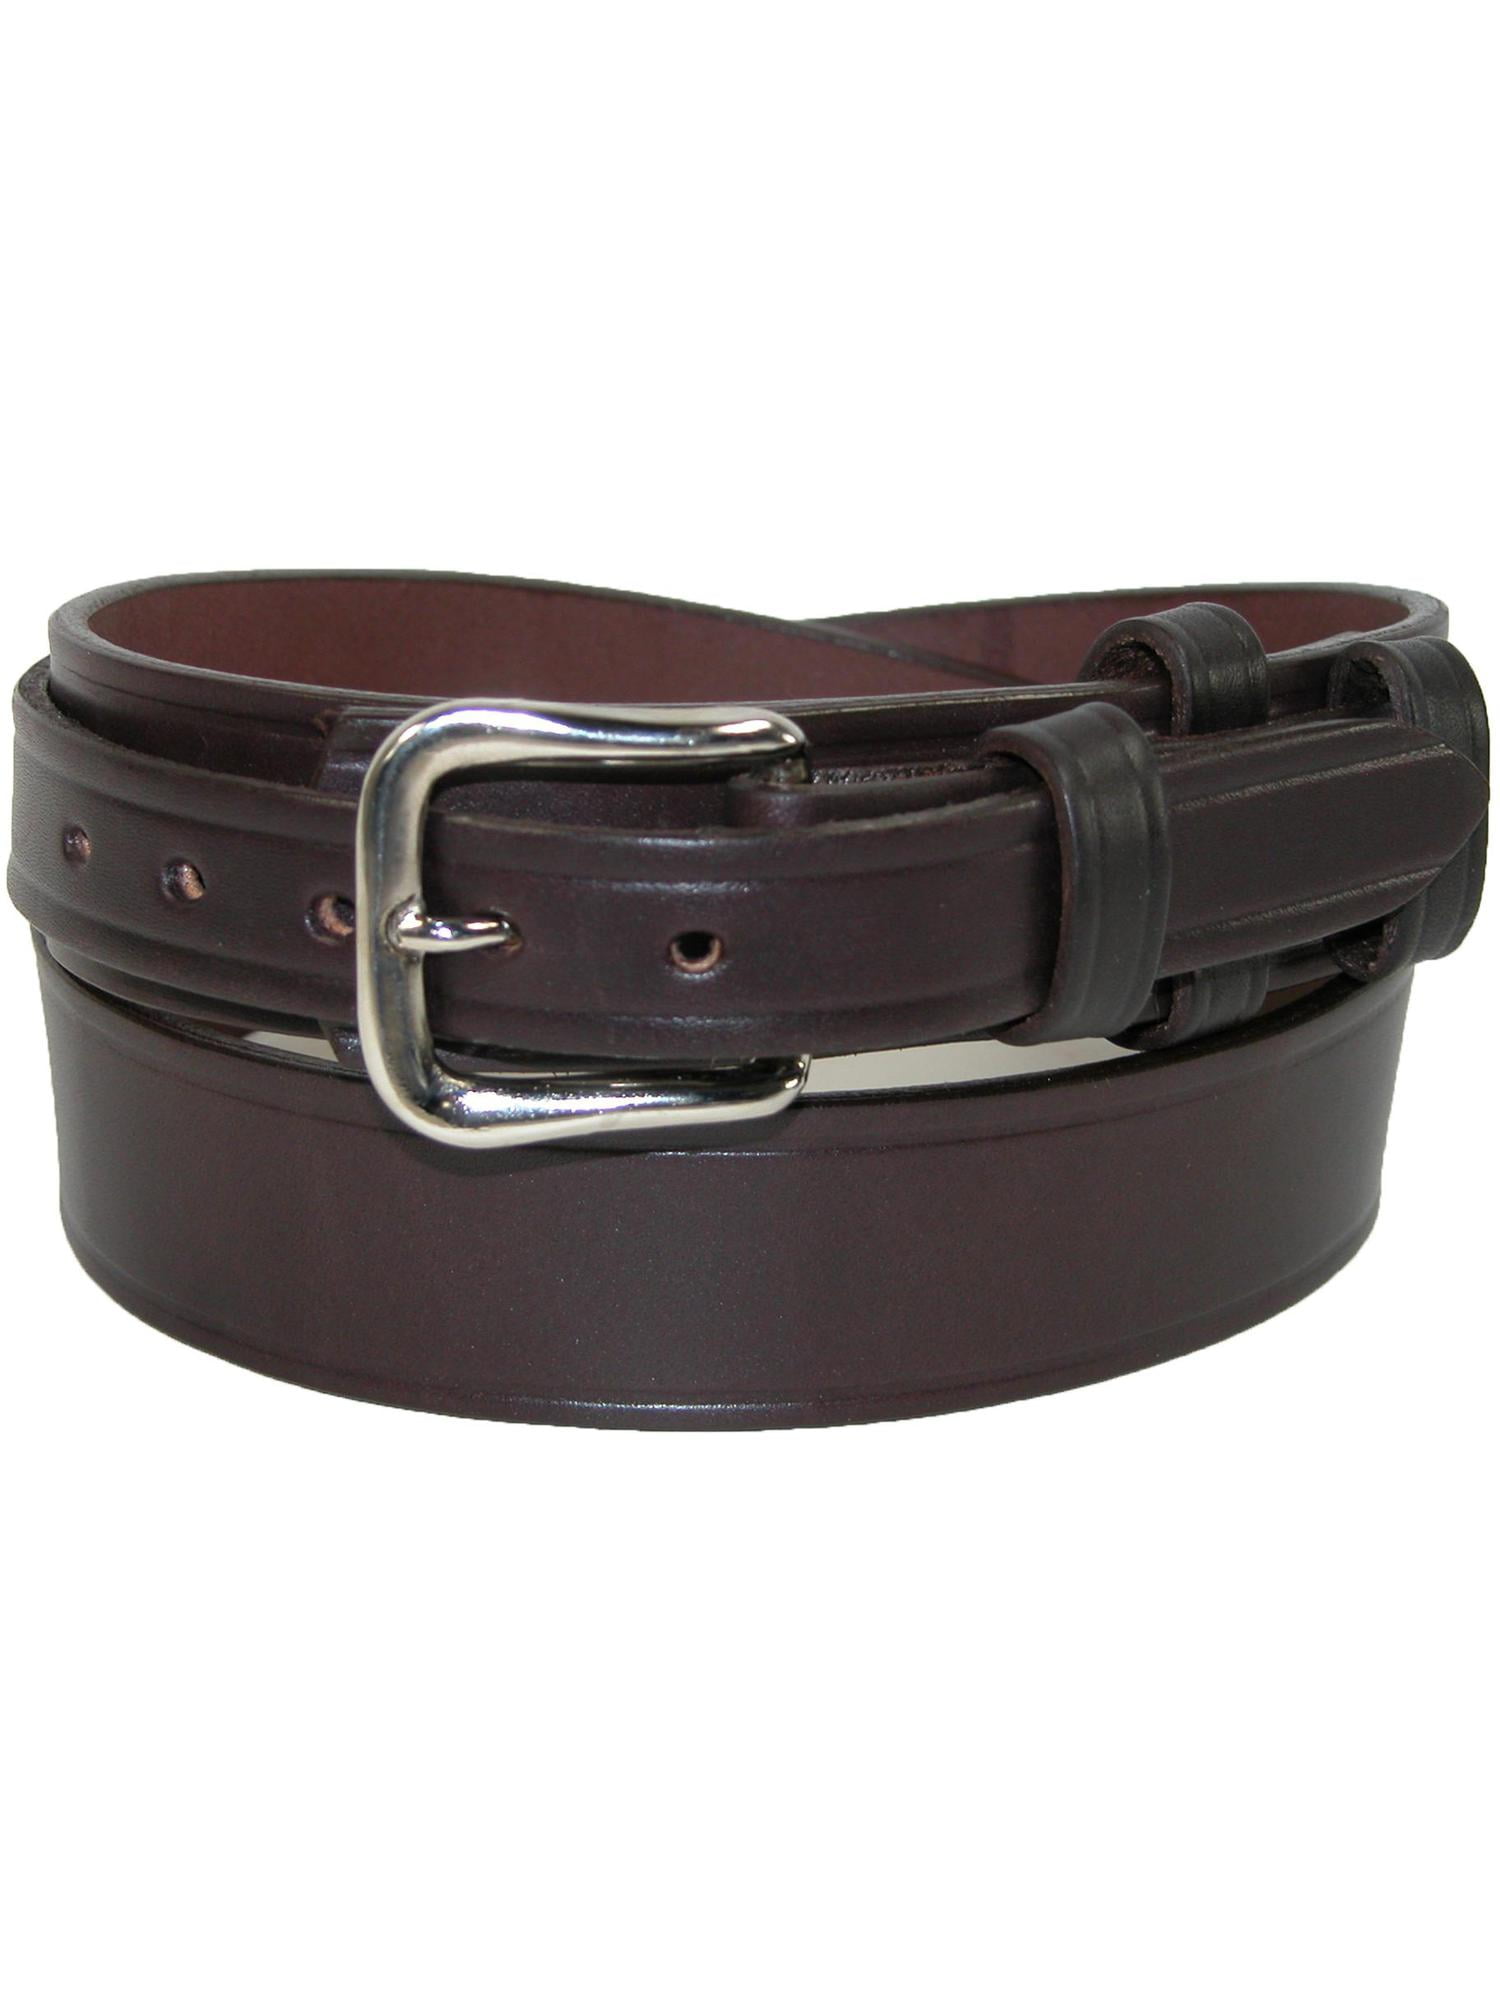 44 40 Size Available: 38 Club Room  Men's Brown Belt 